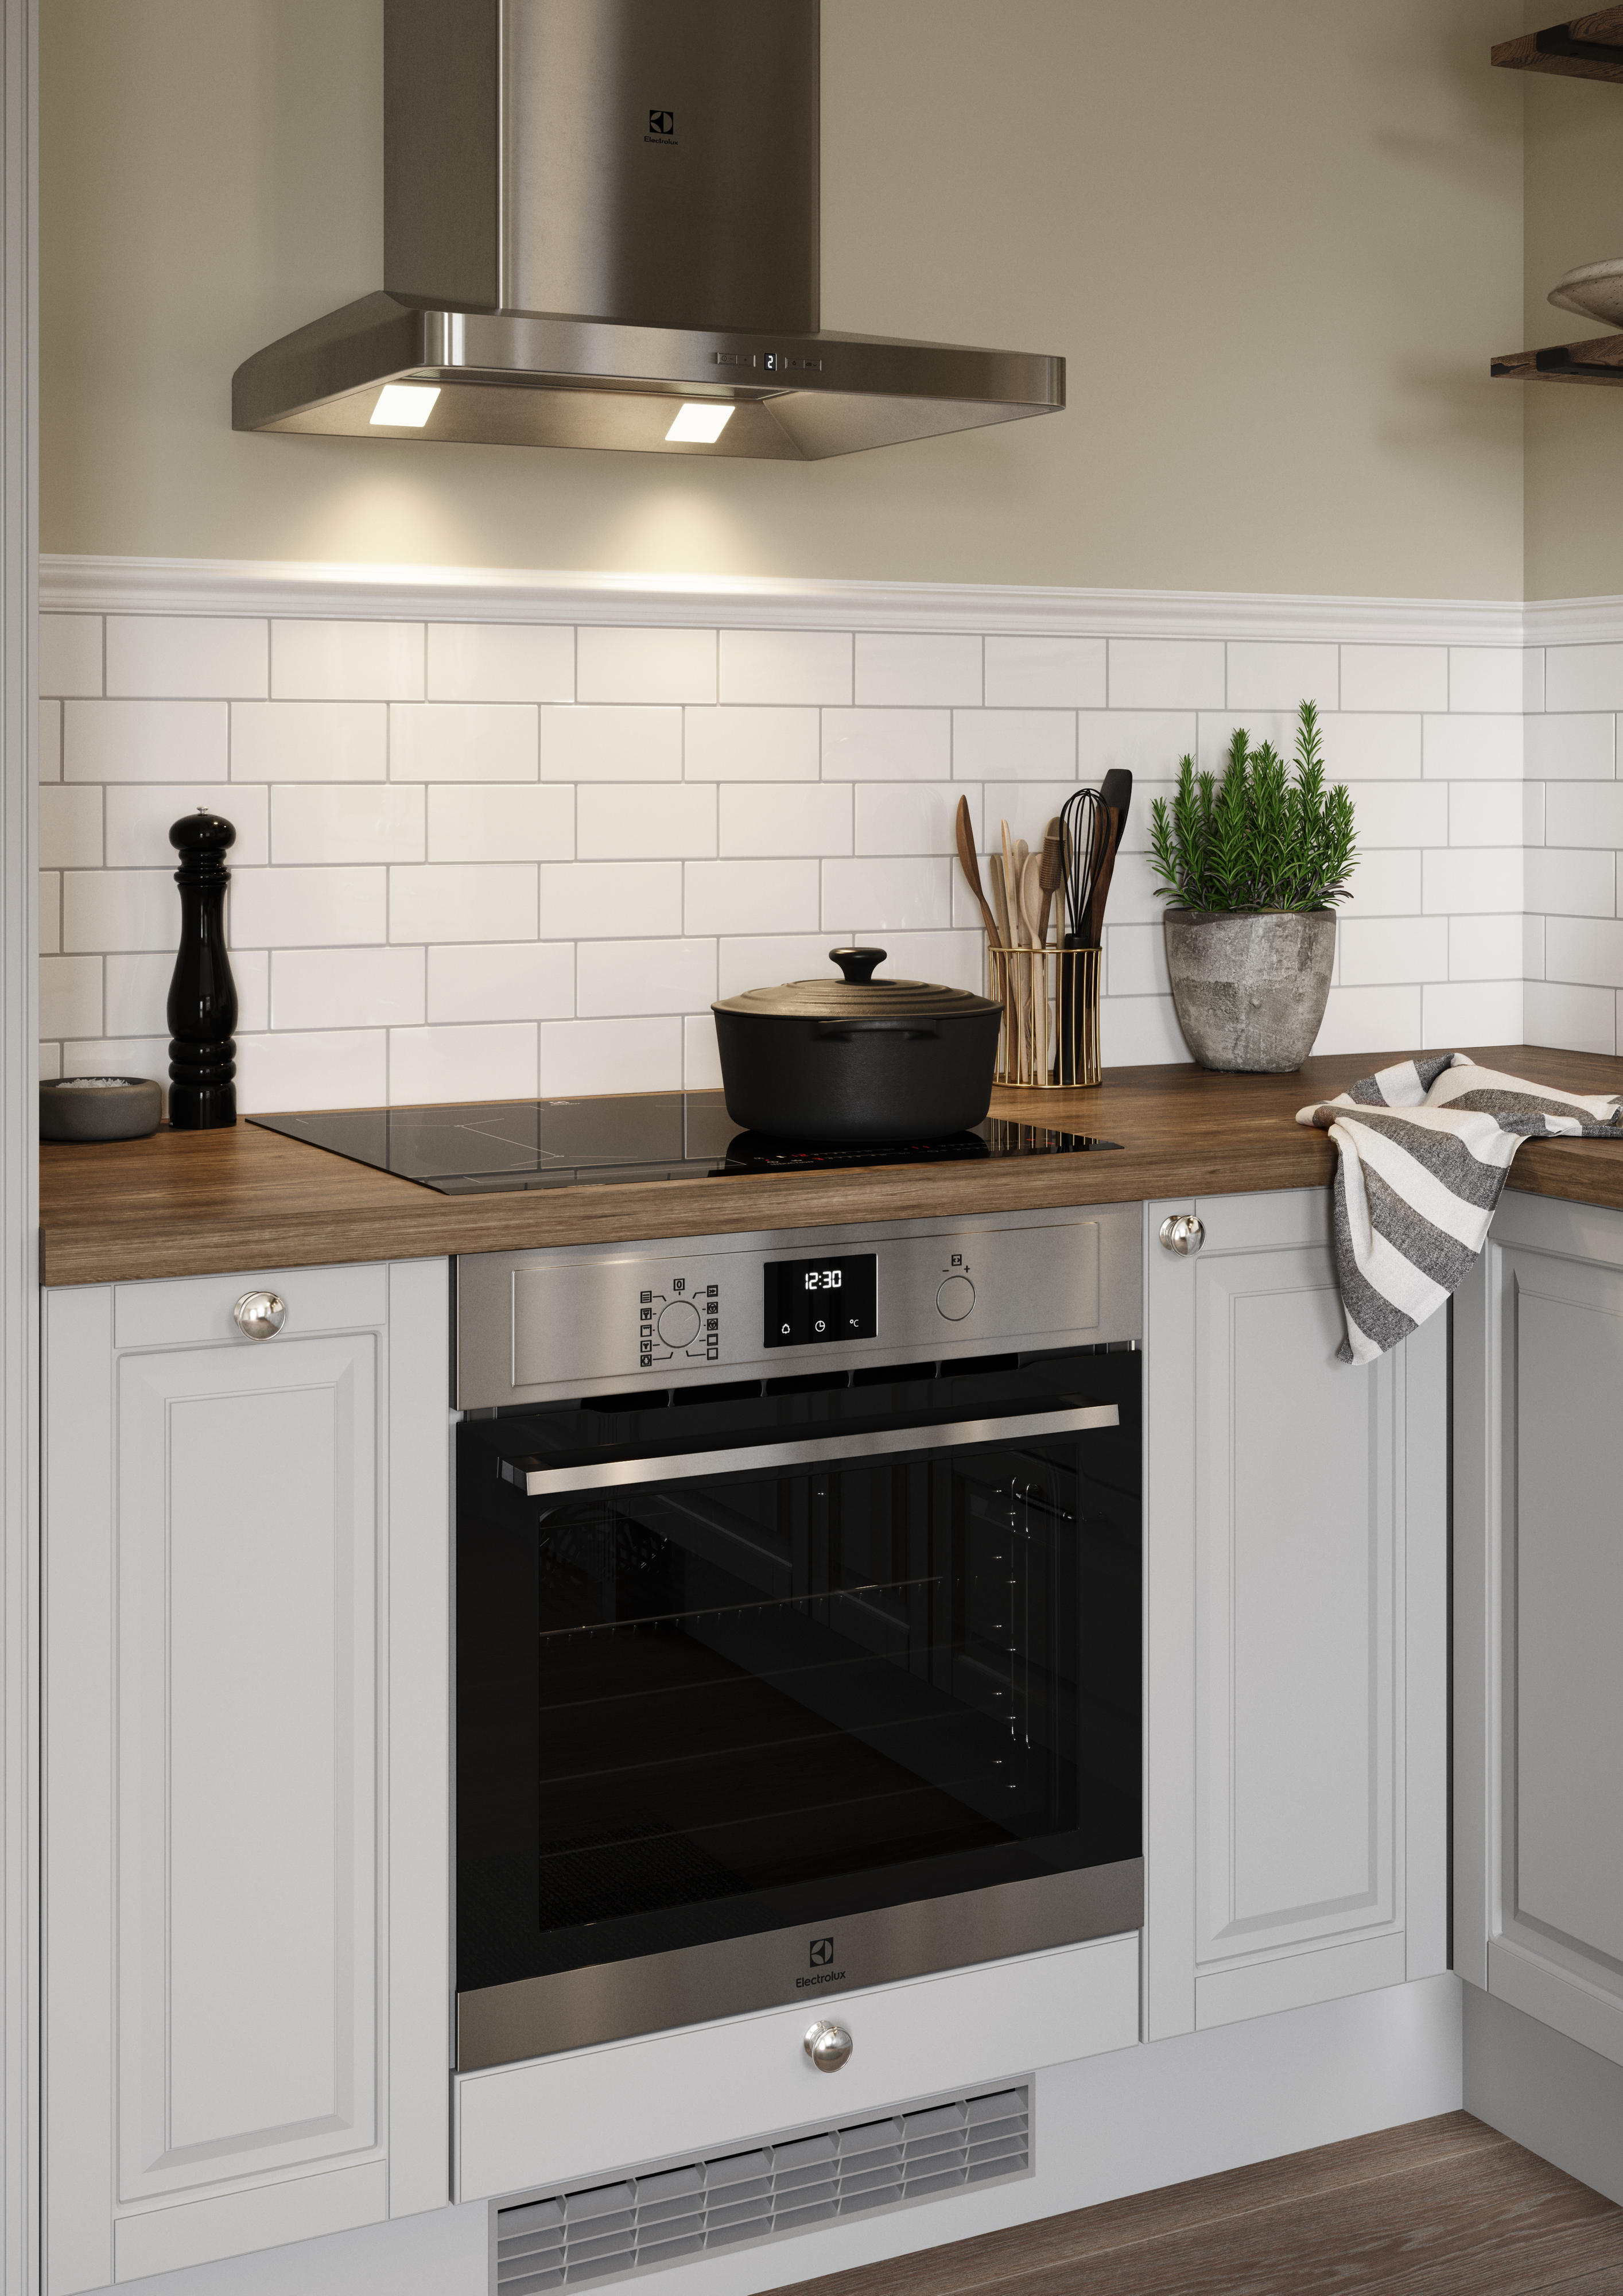 Epoq Heritage Light Grey kitchen with an integrated oven, cooker hood and kitchen fan from Electrolux